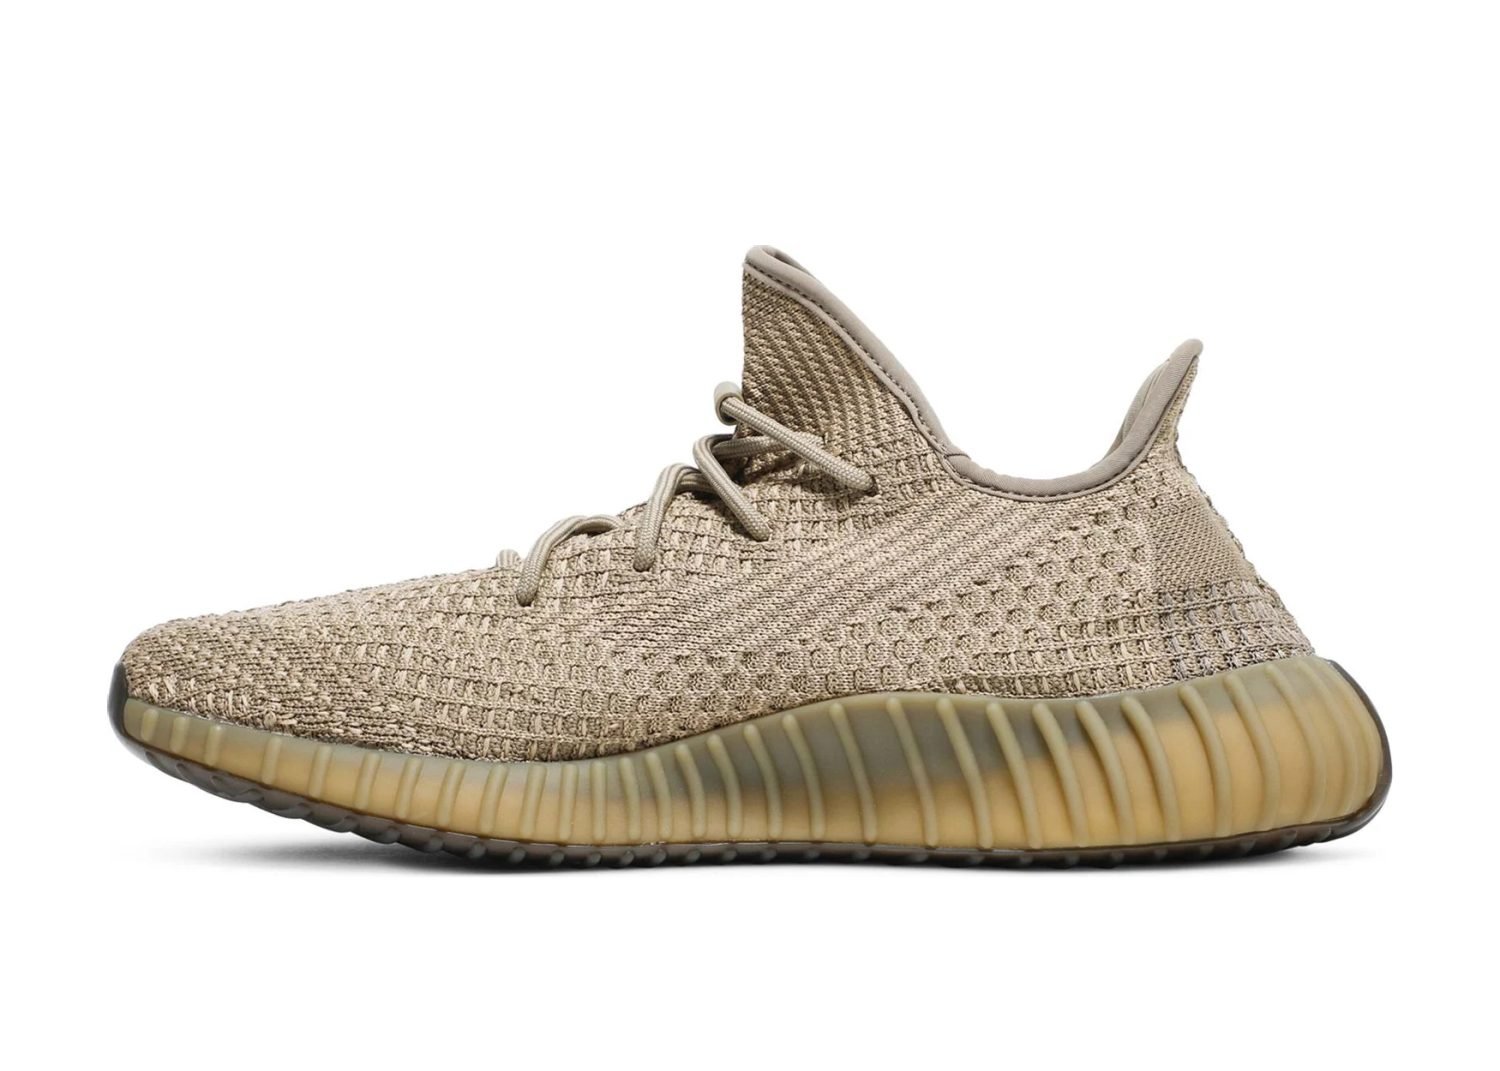 adidas yeezy boost 350 v2 sand taupe2